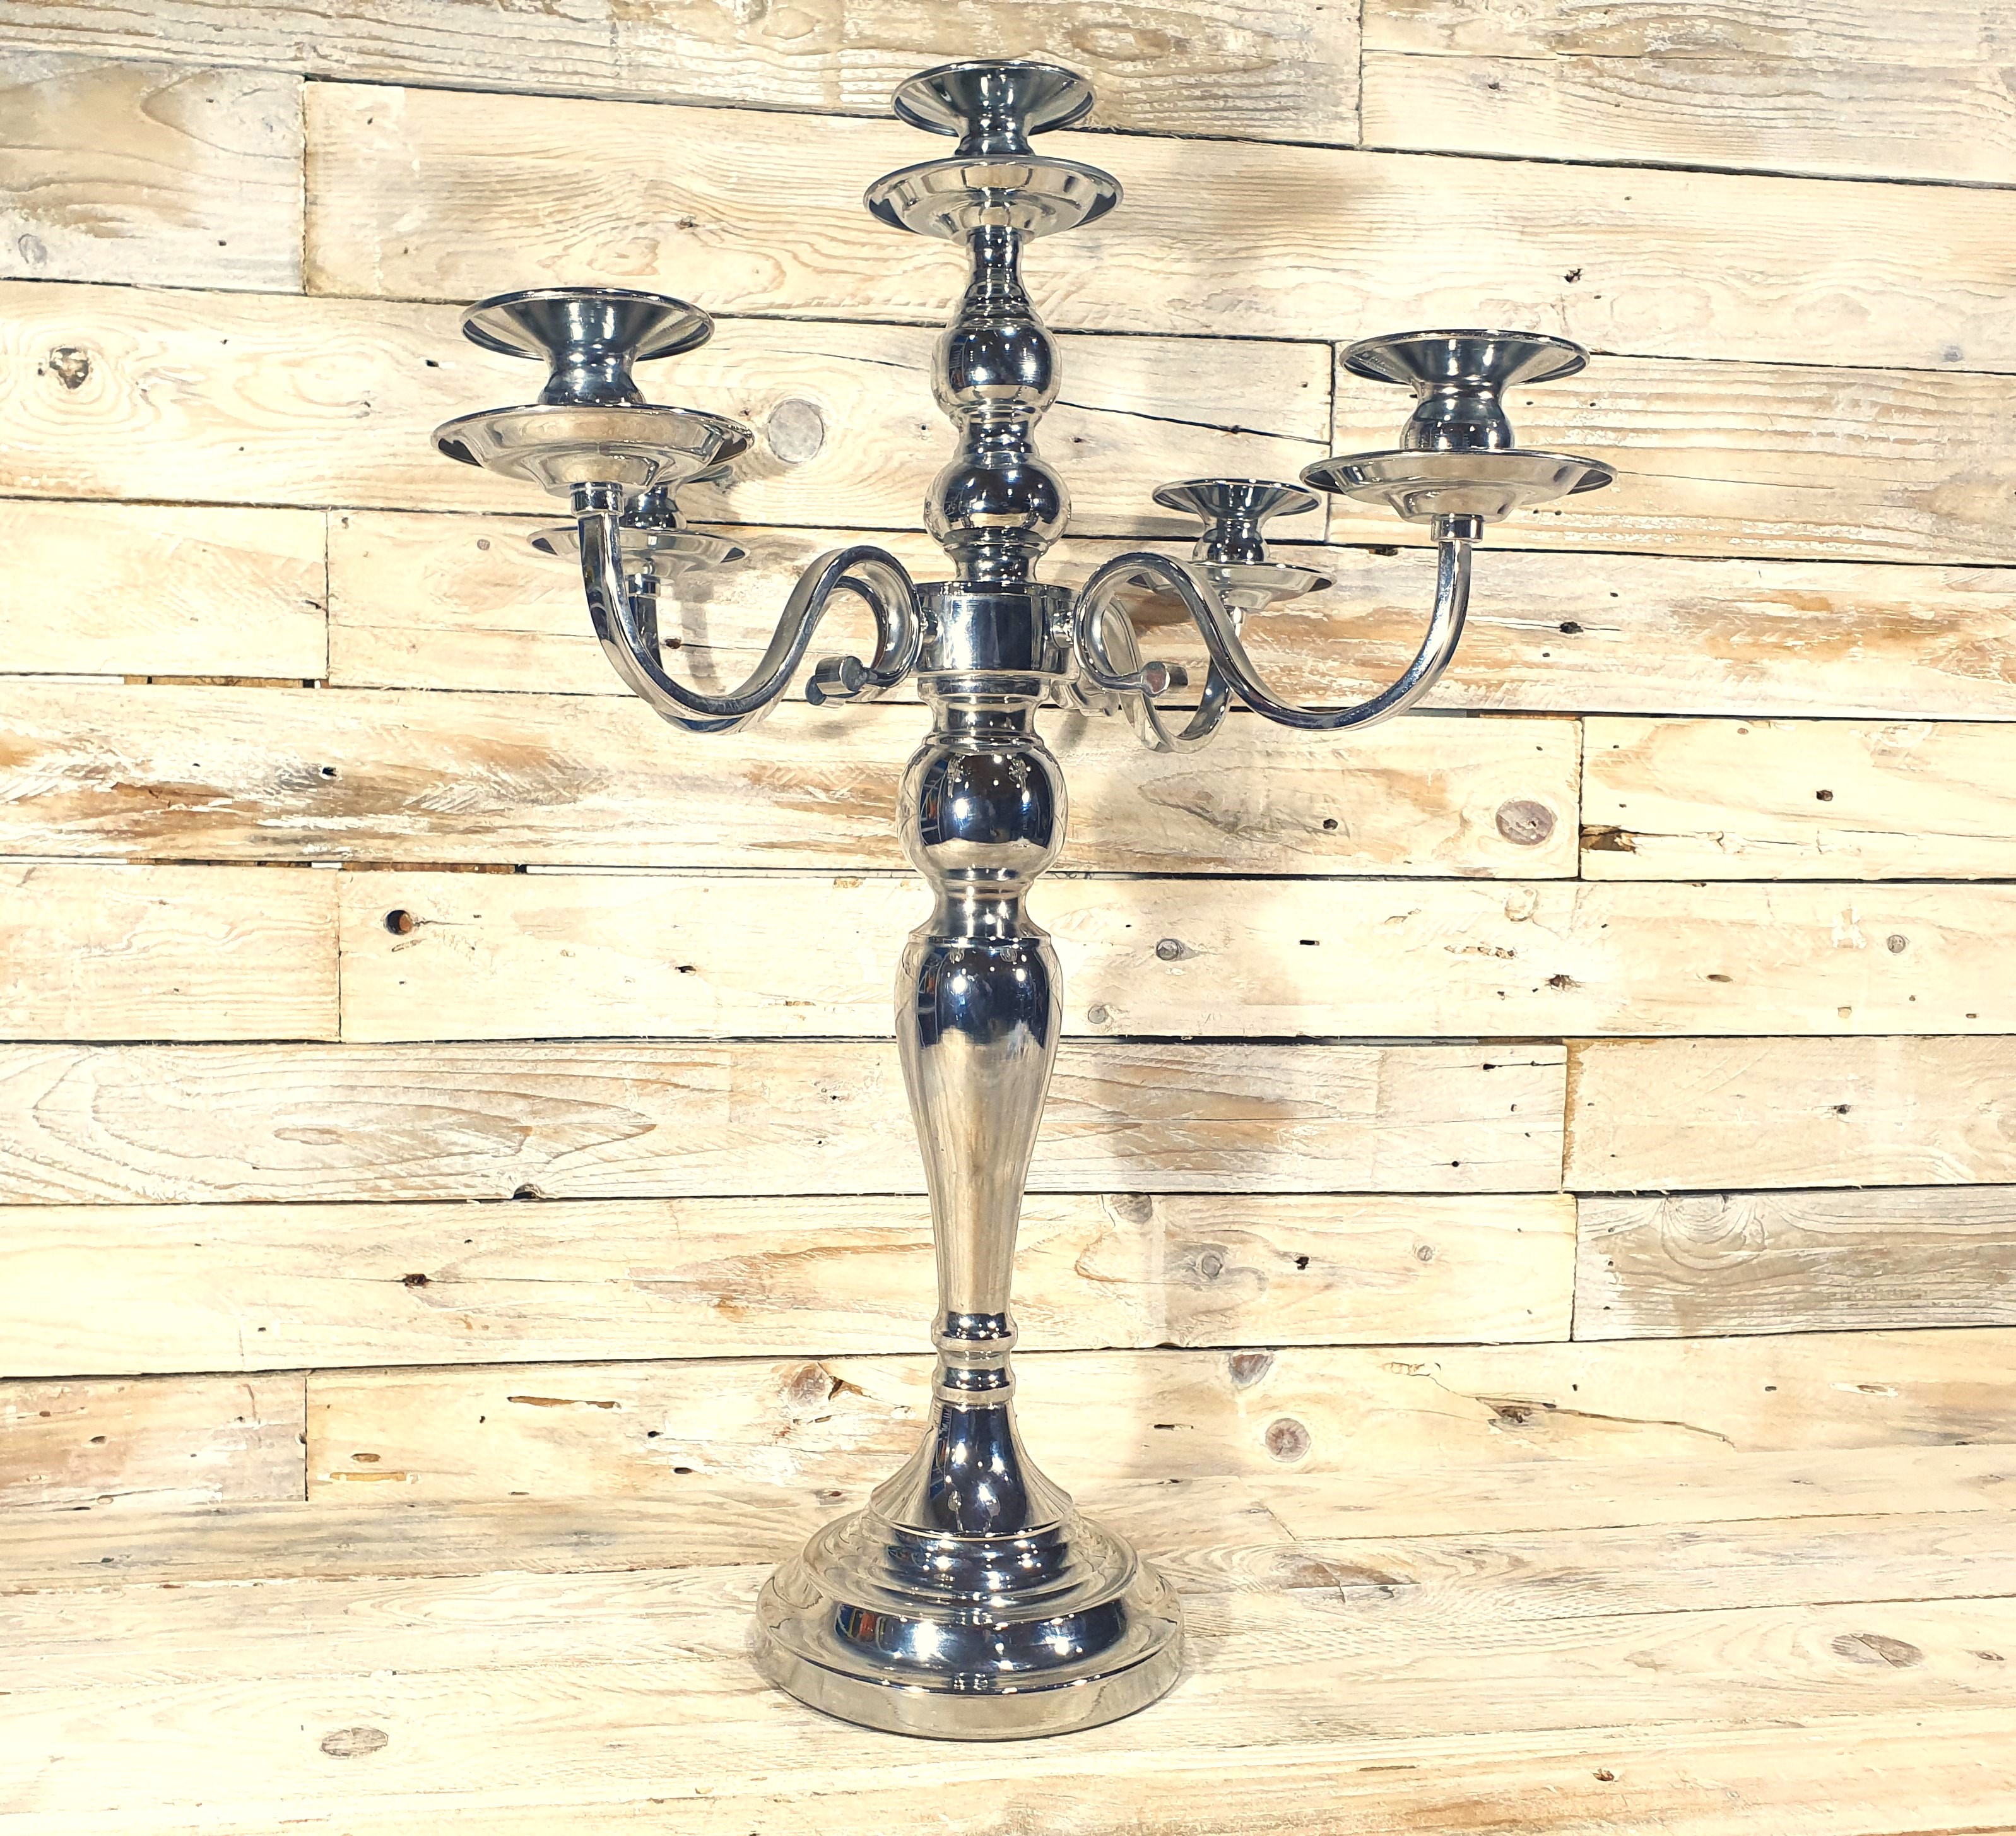 Tall Stainless Steel 5 Pot Table Candelabra Candle Holder 48cm x 33cm x 33cm Rrp £99